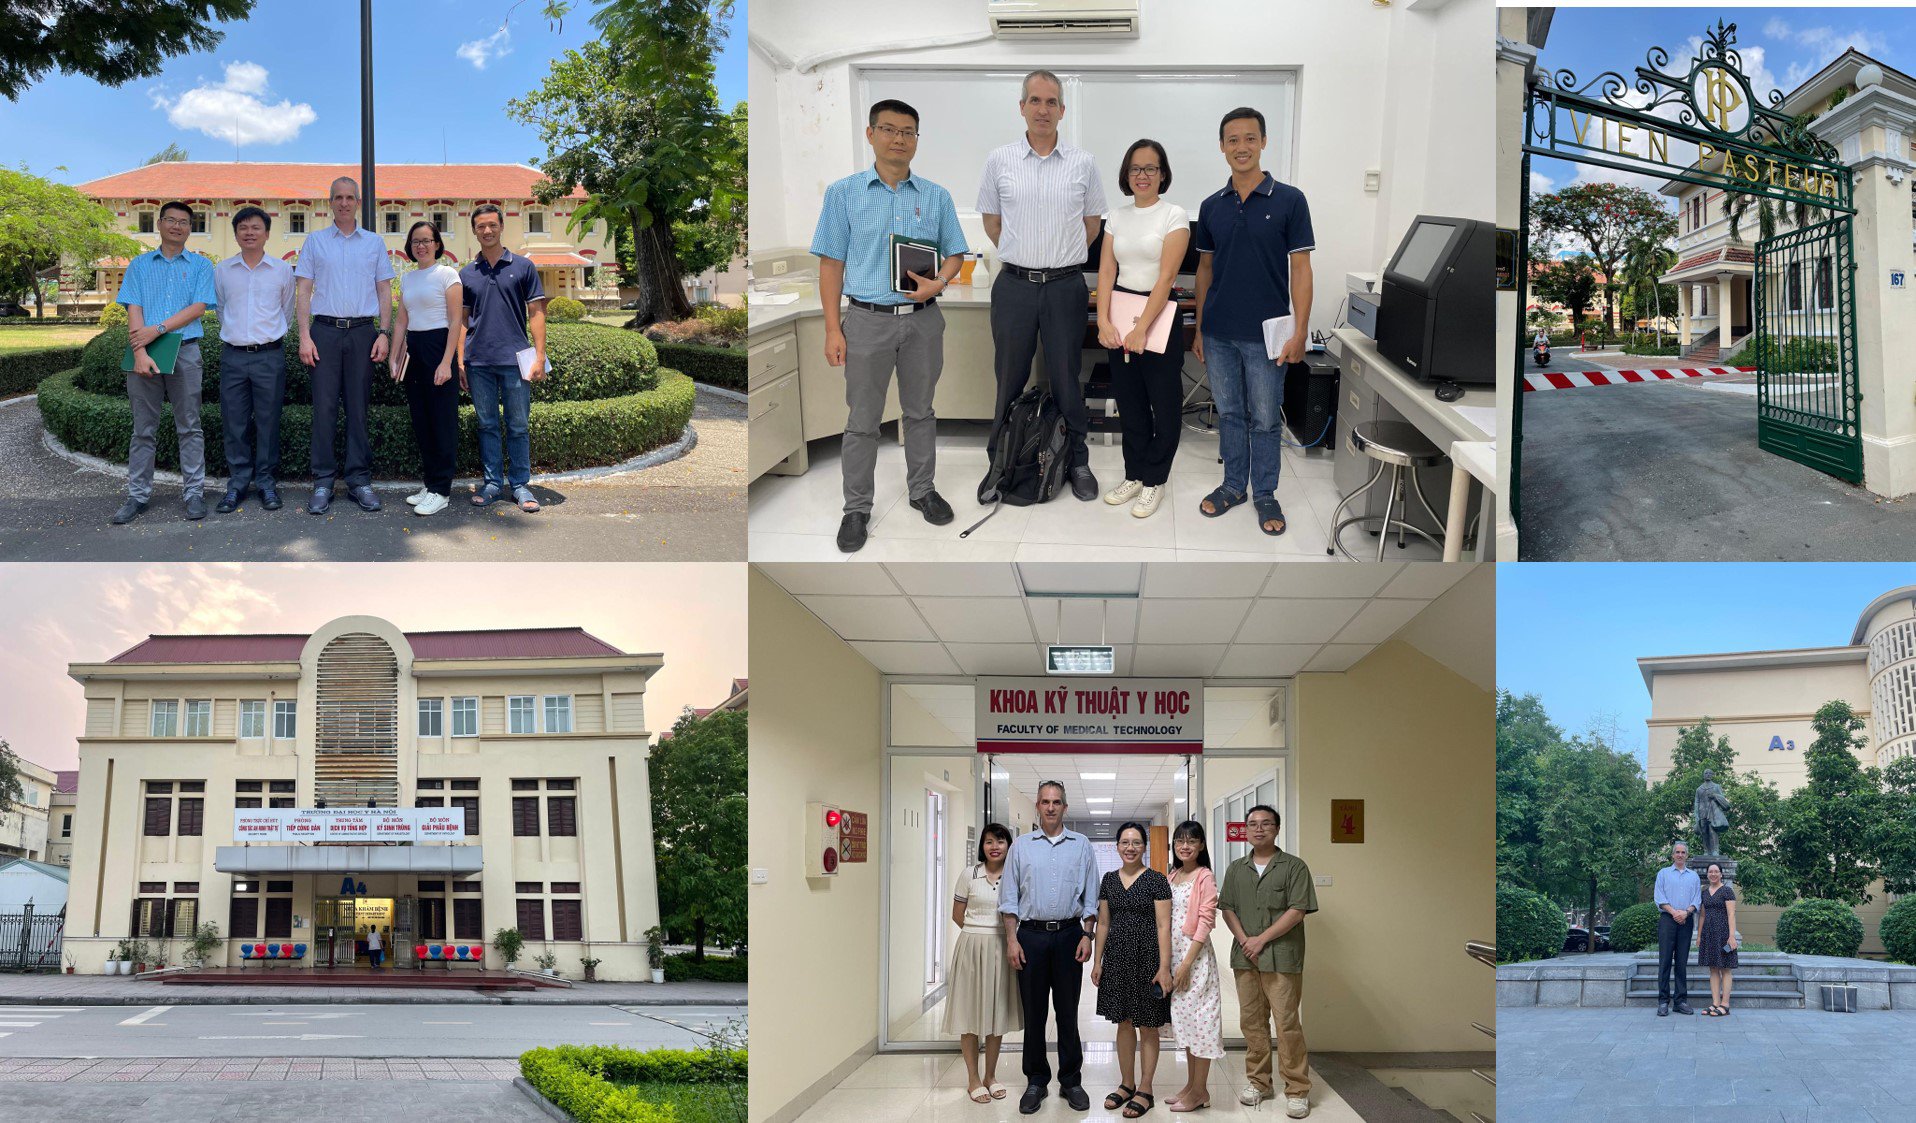 During his recent visit to Vietnam, Prof. Amos Danielli aimed to promote collaboration and met with researchers and clinicians at various institutions. In Ho Chi Minh City, he was hosted by Ms. Vo Thi Trang Dai, the deputy head of the Department of Microbiology and Immunology at the Pasteur Institute, along with her colleagues Dr. Vo and Dr. Manh. In Hanoi, Prof. Danielli met with Dr. Le Thi Hoi, the head of the Department of Clinical Microbiology and Parasitology at Hanoi Medical University, who had visited our laboratory at Bar-Ilan University six months ago.